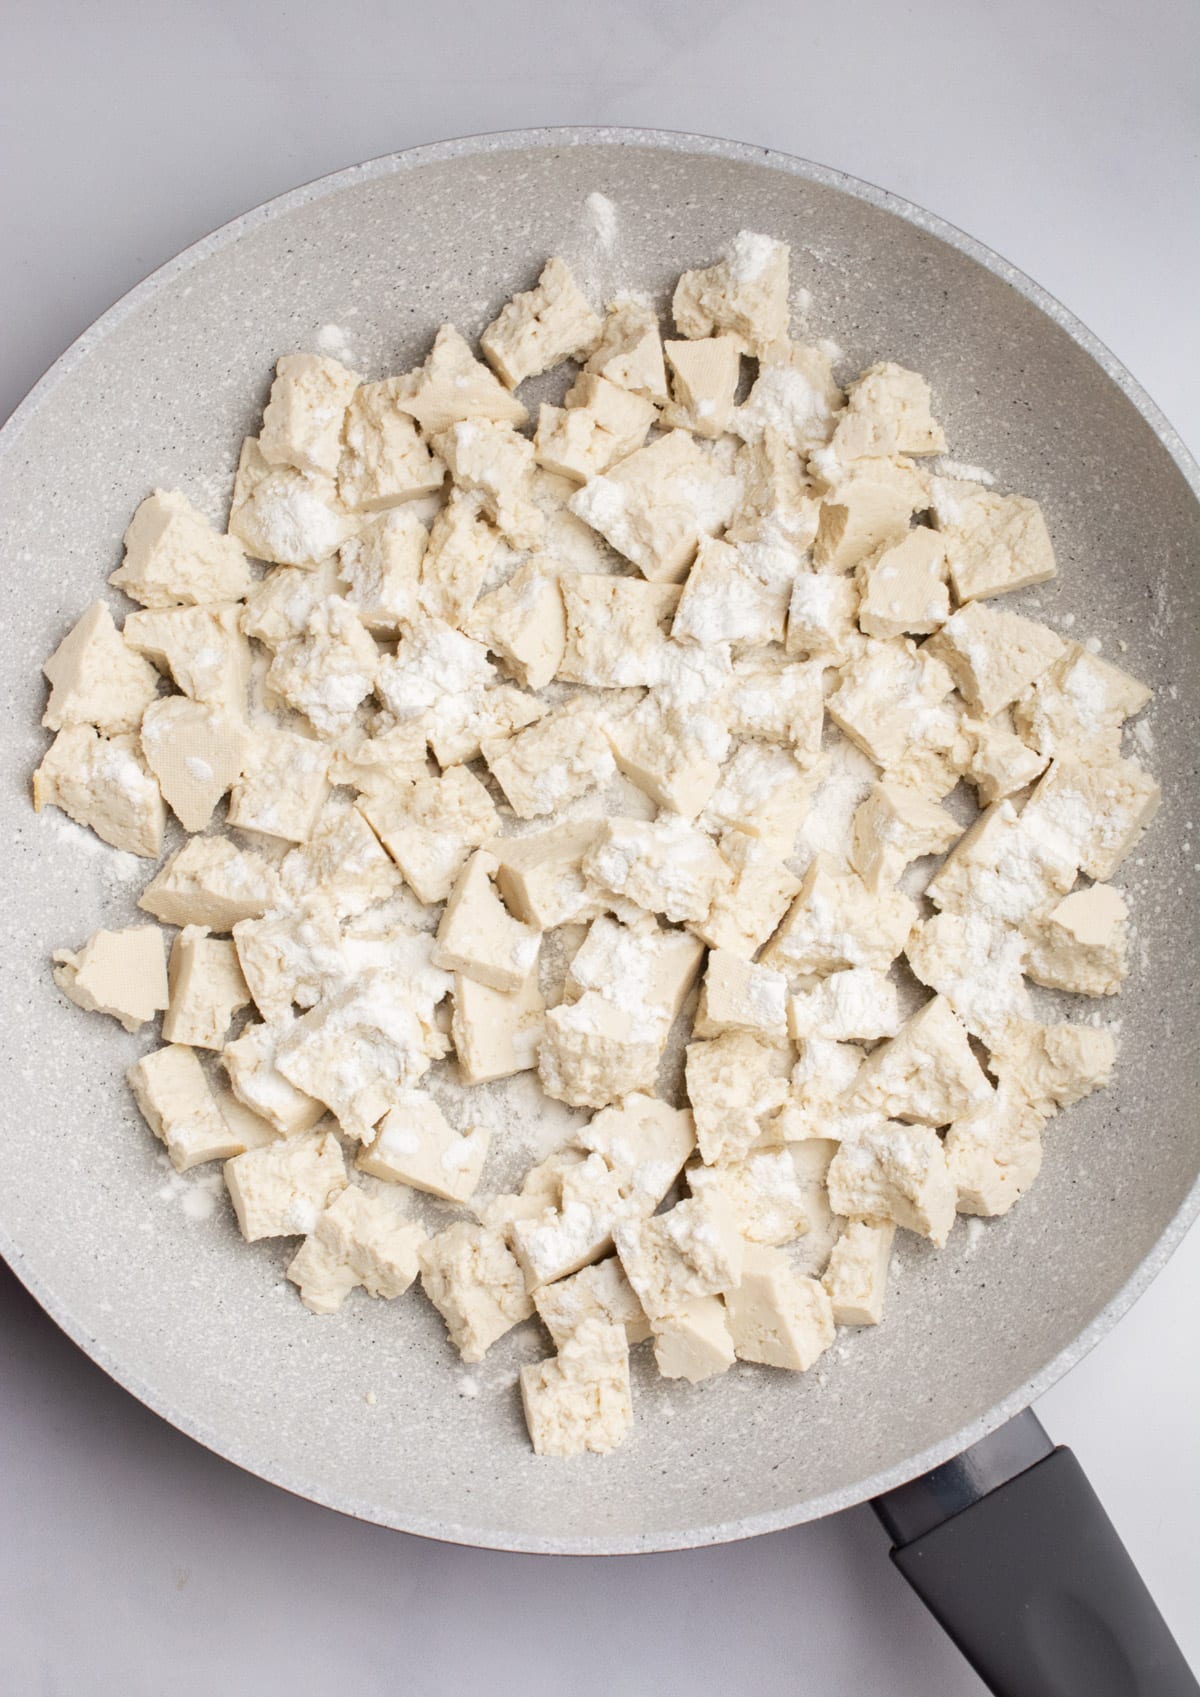 A pan of bite-sized pieces of tofu sprinkled with cornstarch.